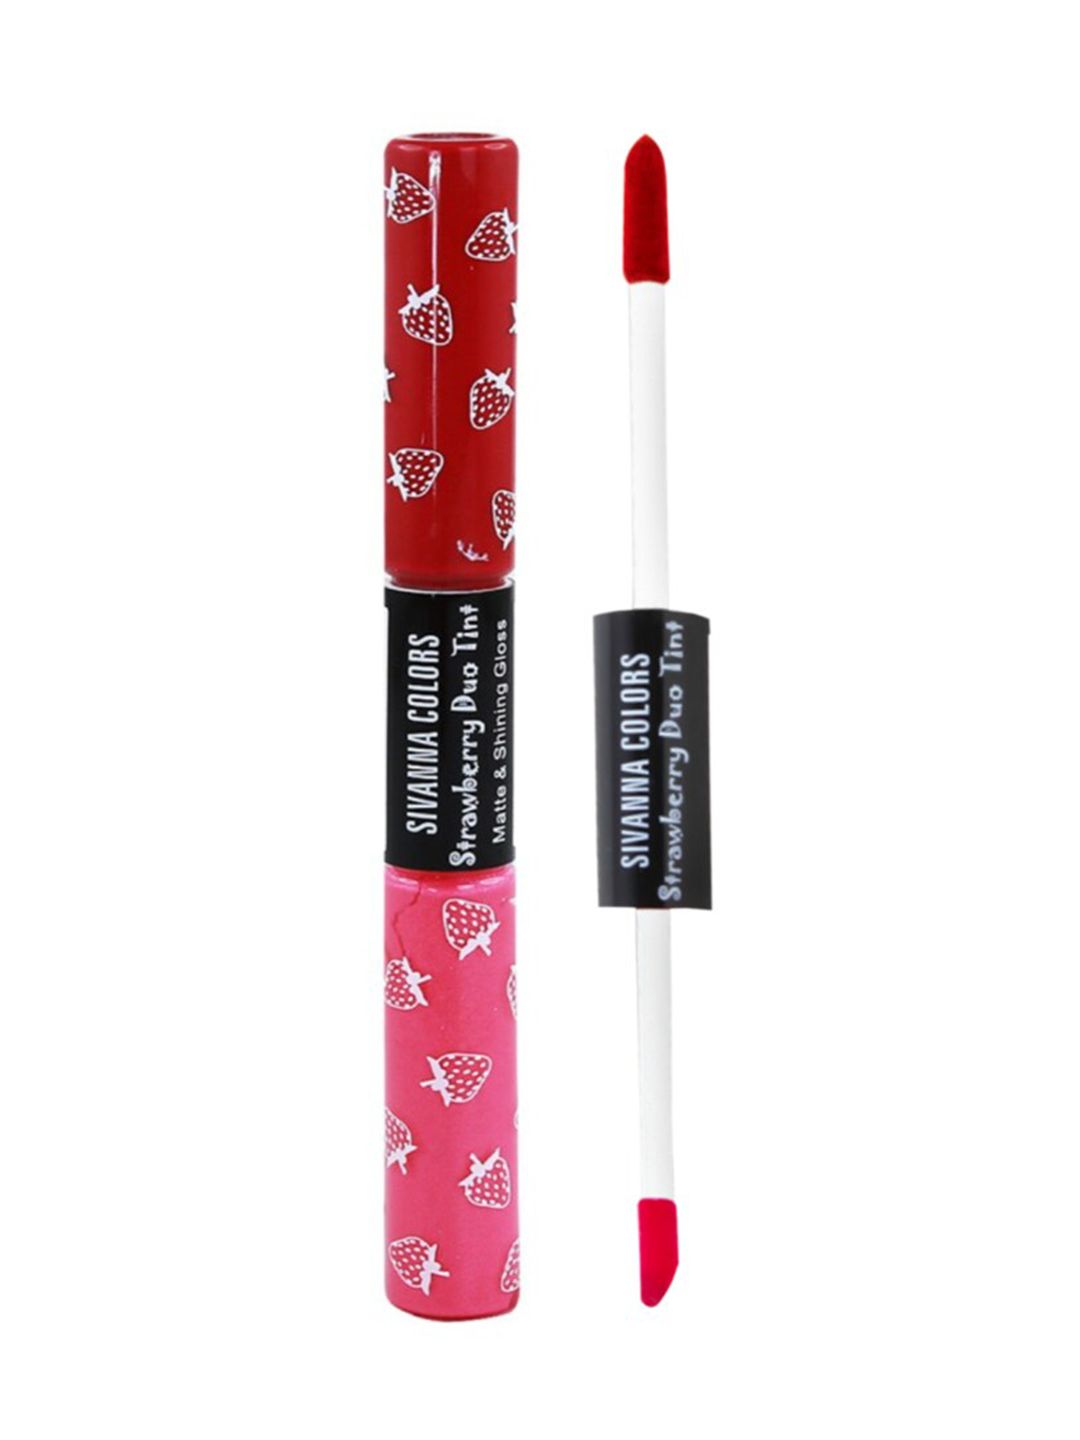 Sivanna Colors 2 in 1 Strawberry Duo Tint Matte & Shining Lip Gloss - DK035 03 Price in India